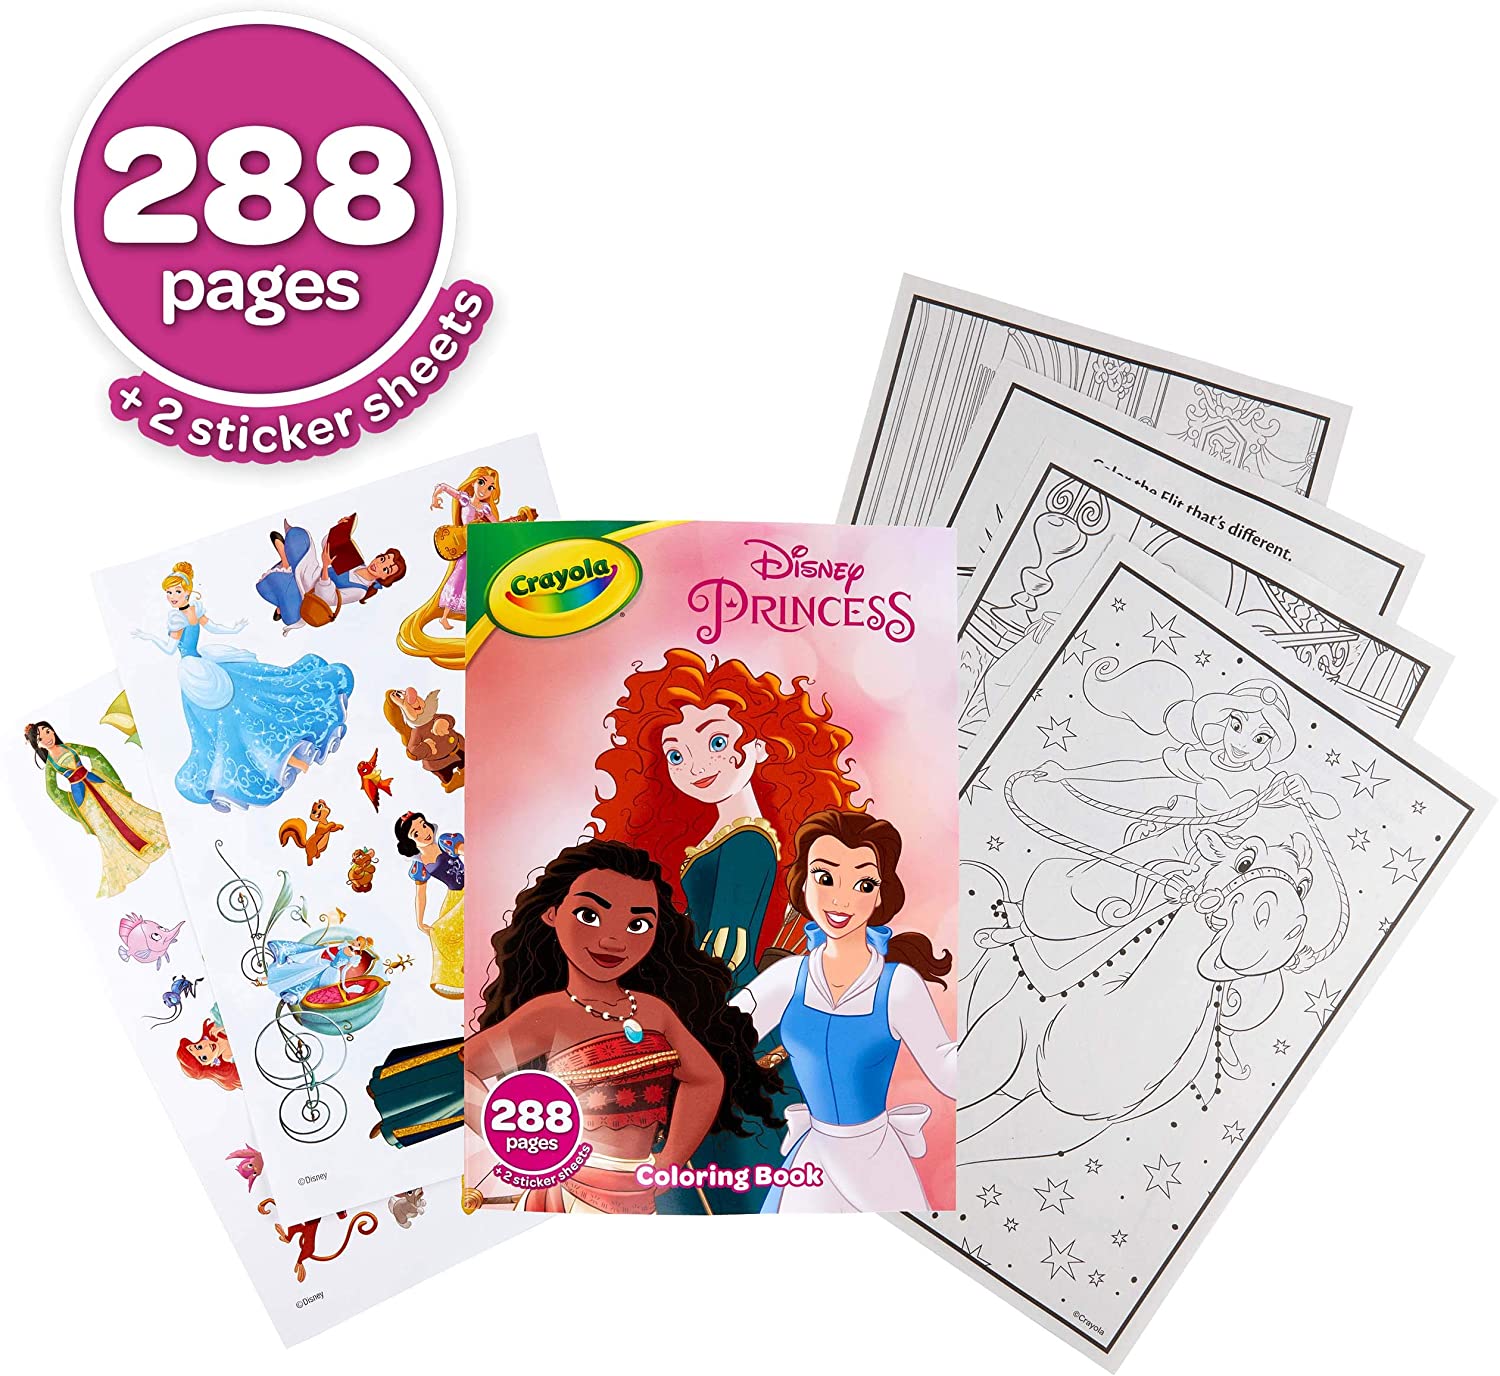 03) Crayola Disney Princess Coloring Book with Stickers pages